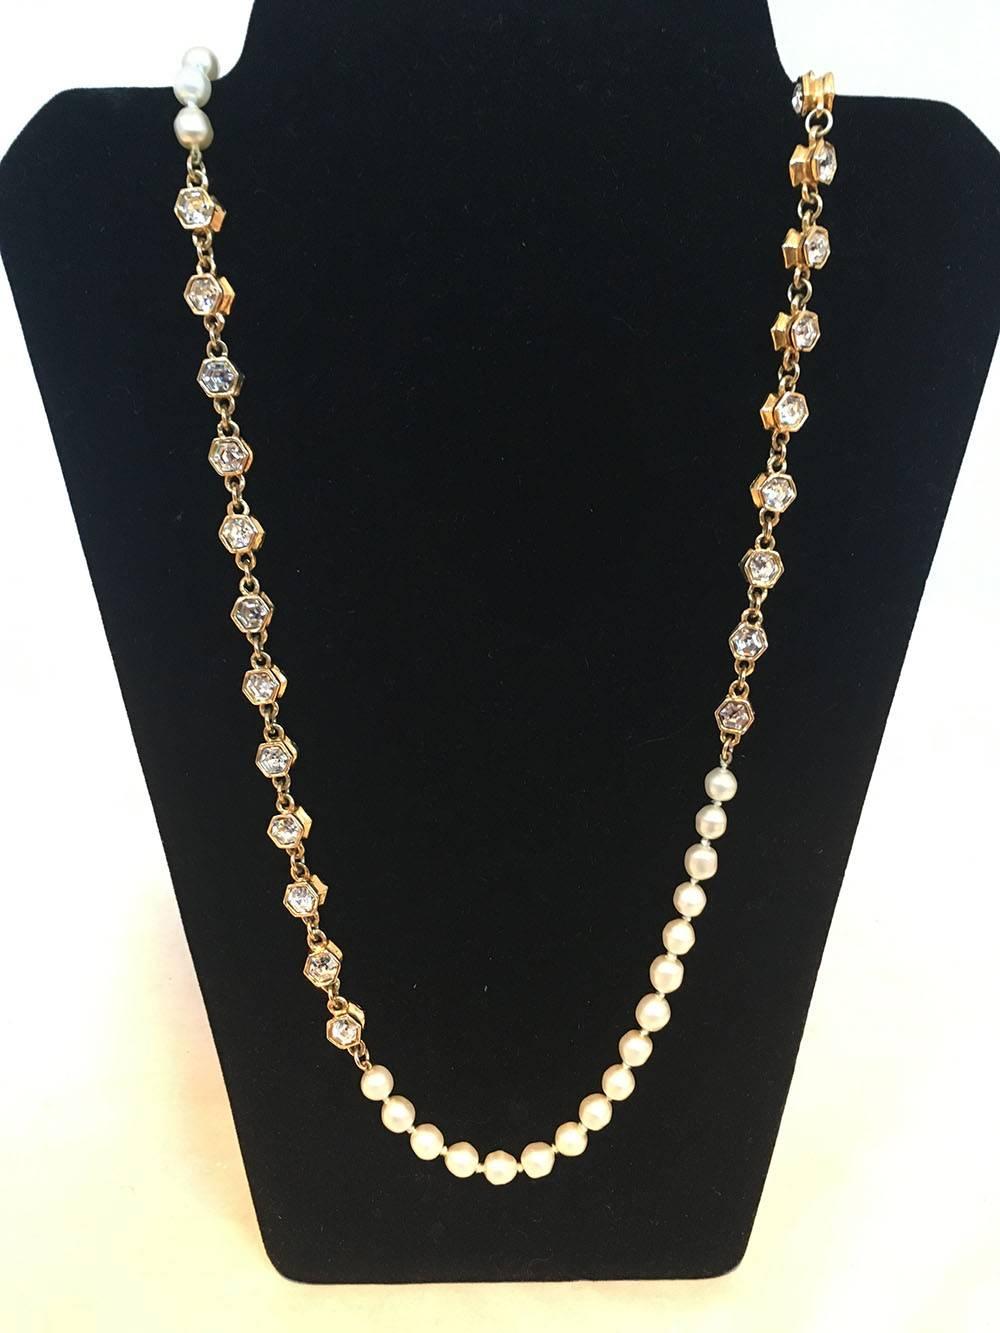 BEAUTIFUL Chanel Vintage Pearl and Crystal Beaded Necklace in excellent condition.  Round pearl beads with small gold hexagon crystal beads. This piece switches between 12 crystal beads and 17 pearls throughout. Can be worn long or wrapped for a